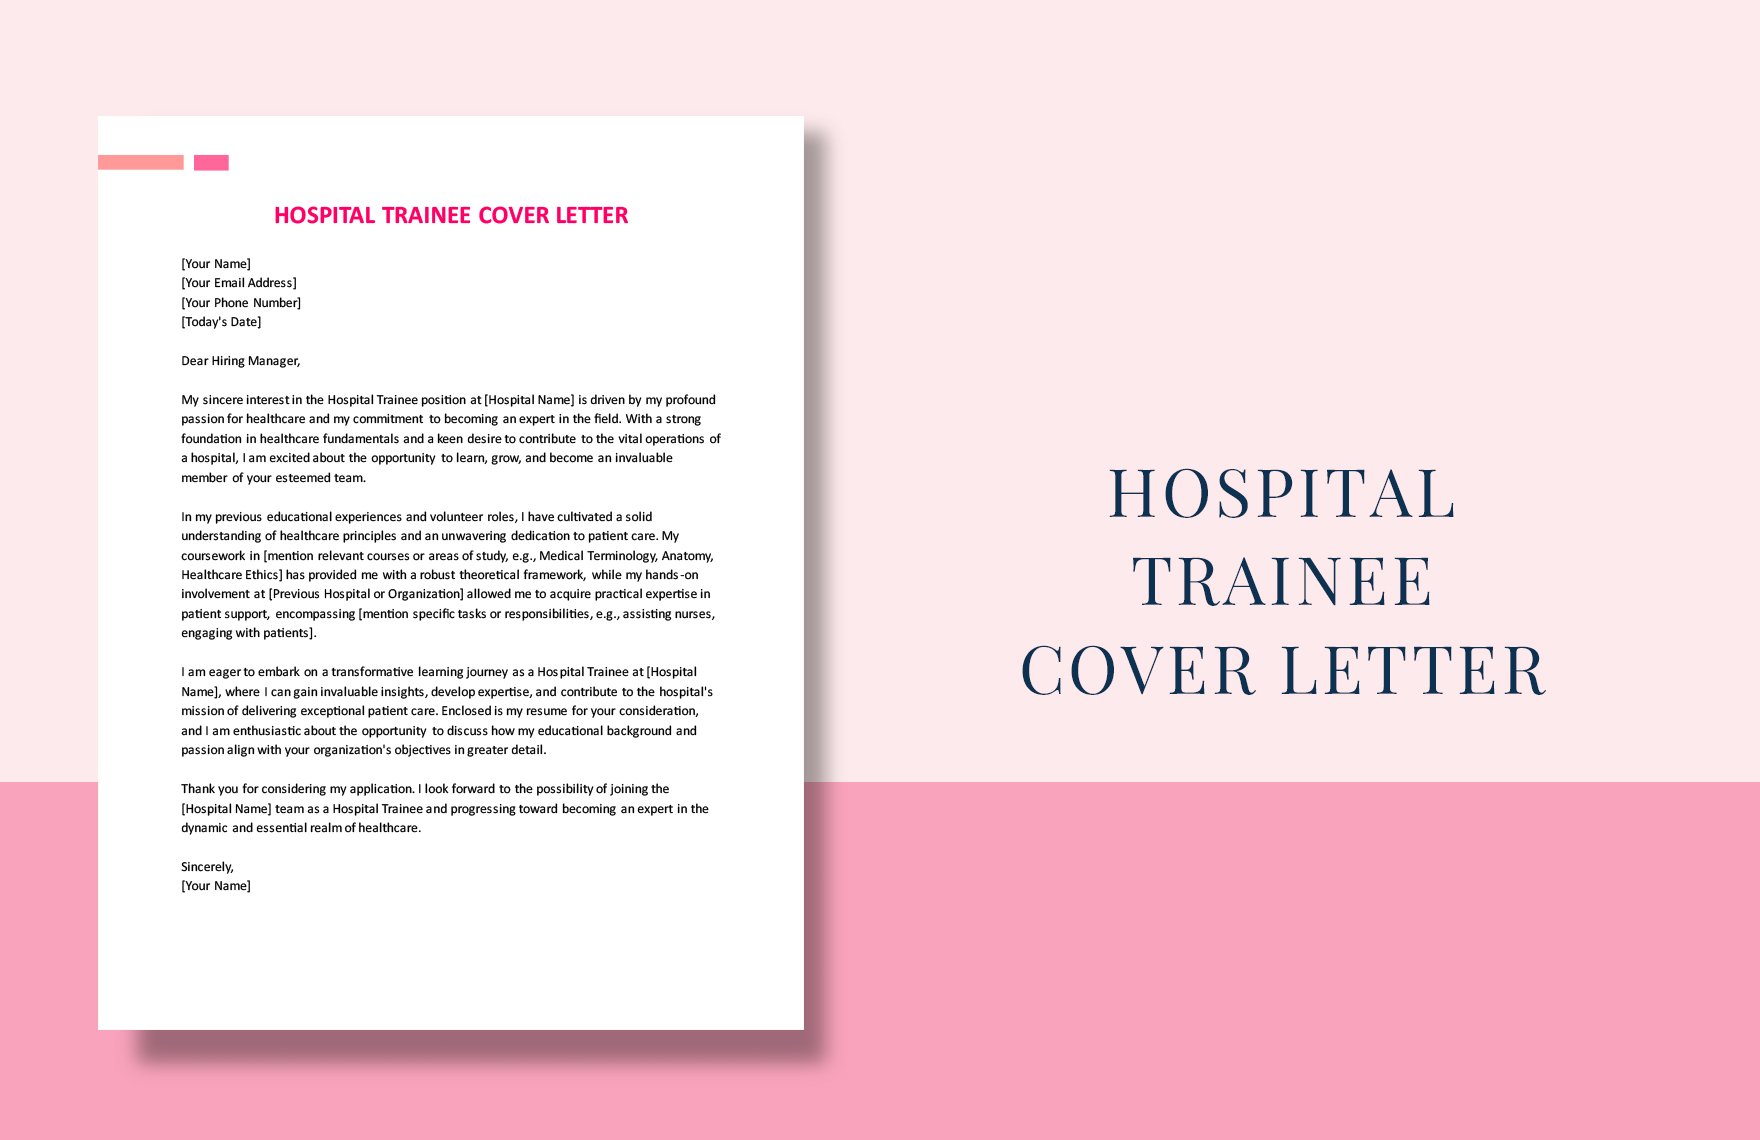 Hospital Trainee Cover Letter